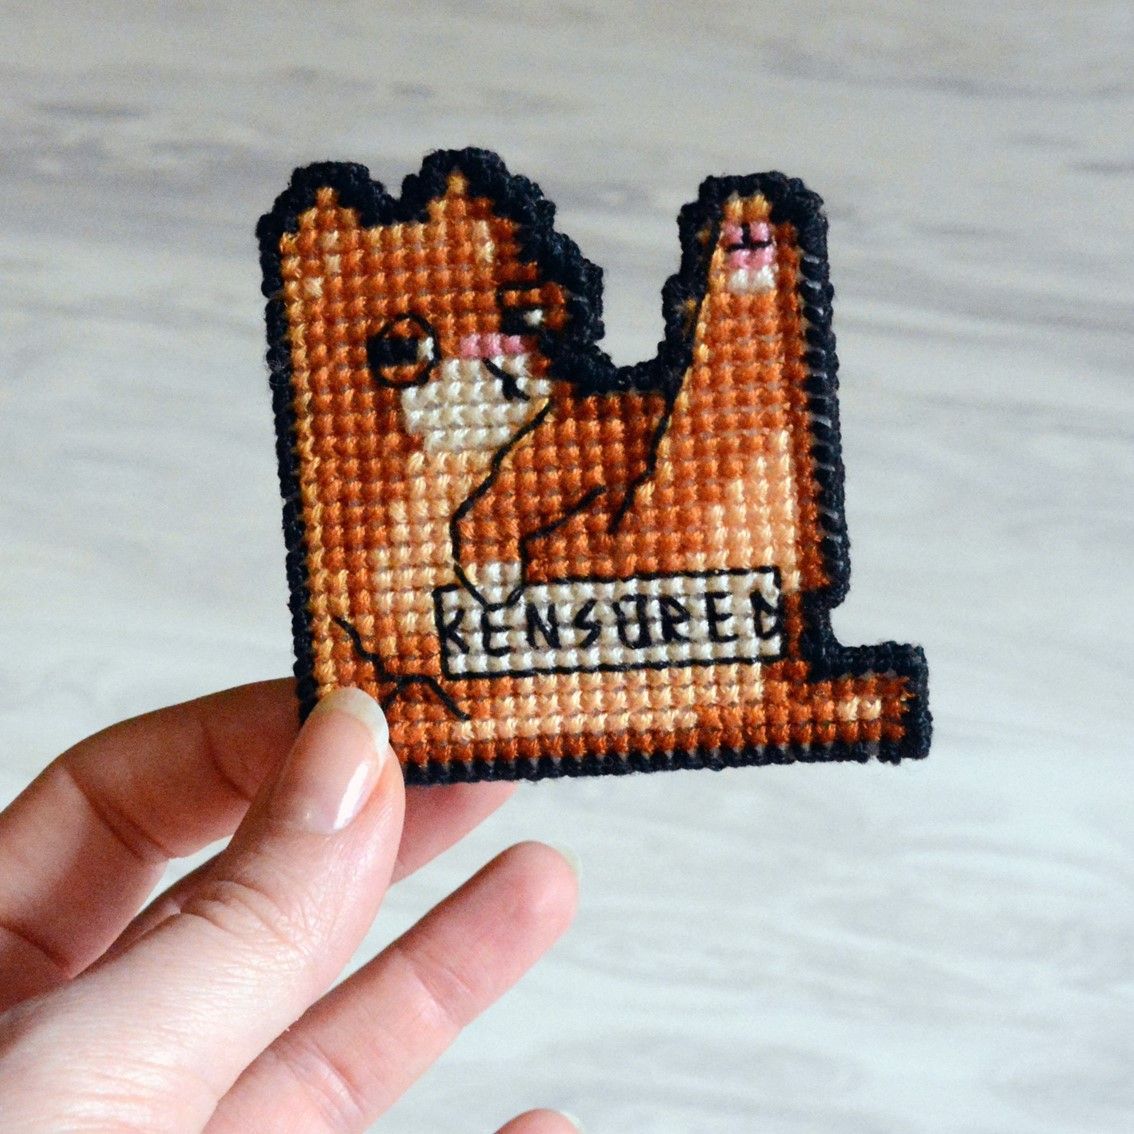 Orange tabby cat corner cross stitch bookmark: pattern and tutorial for plastic canvas PDF by Smasterilli. Digital cross stitch pattern for instant download.